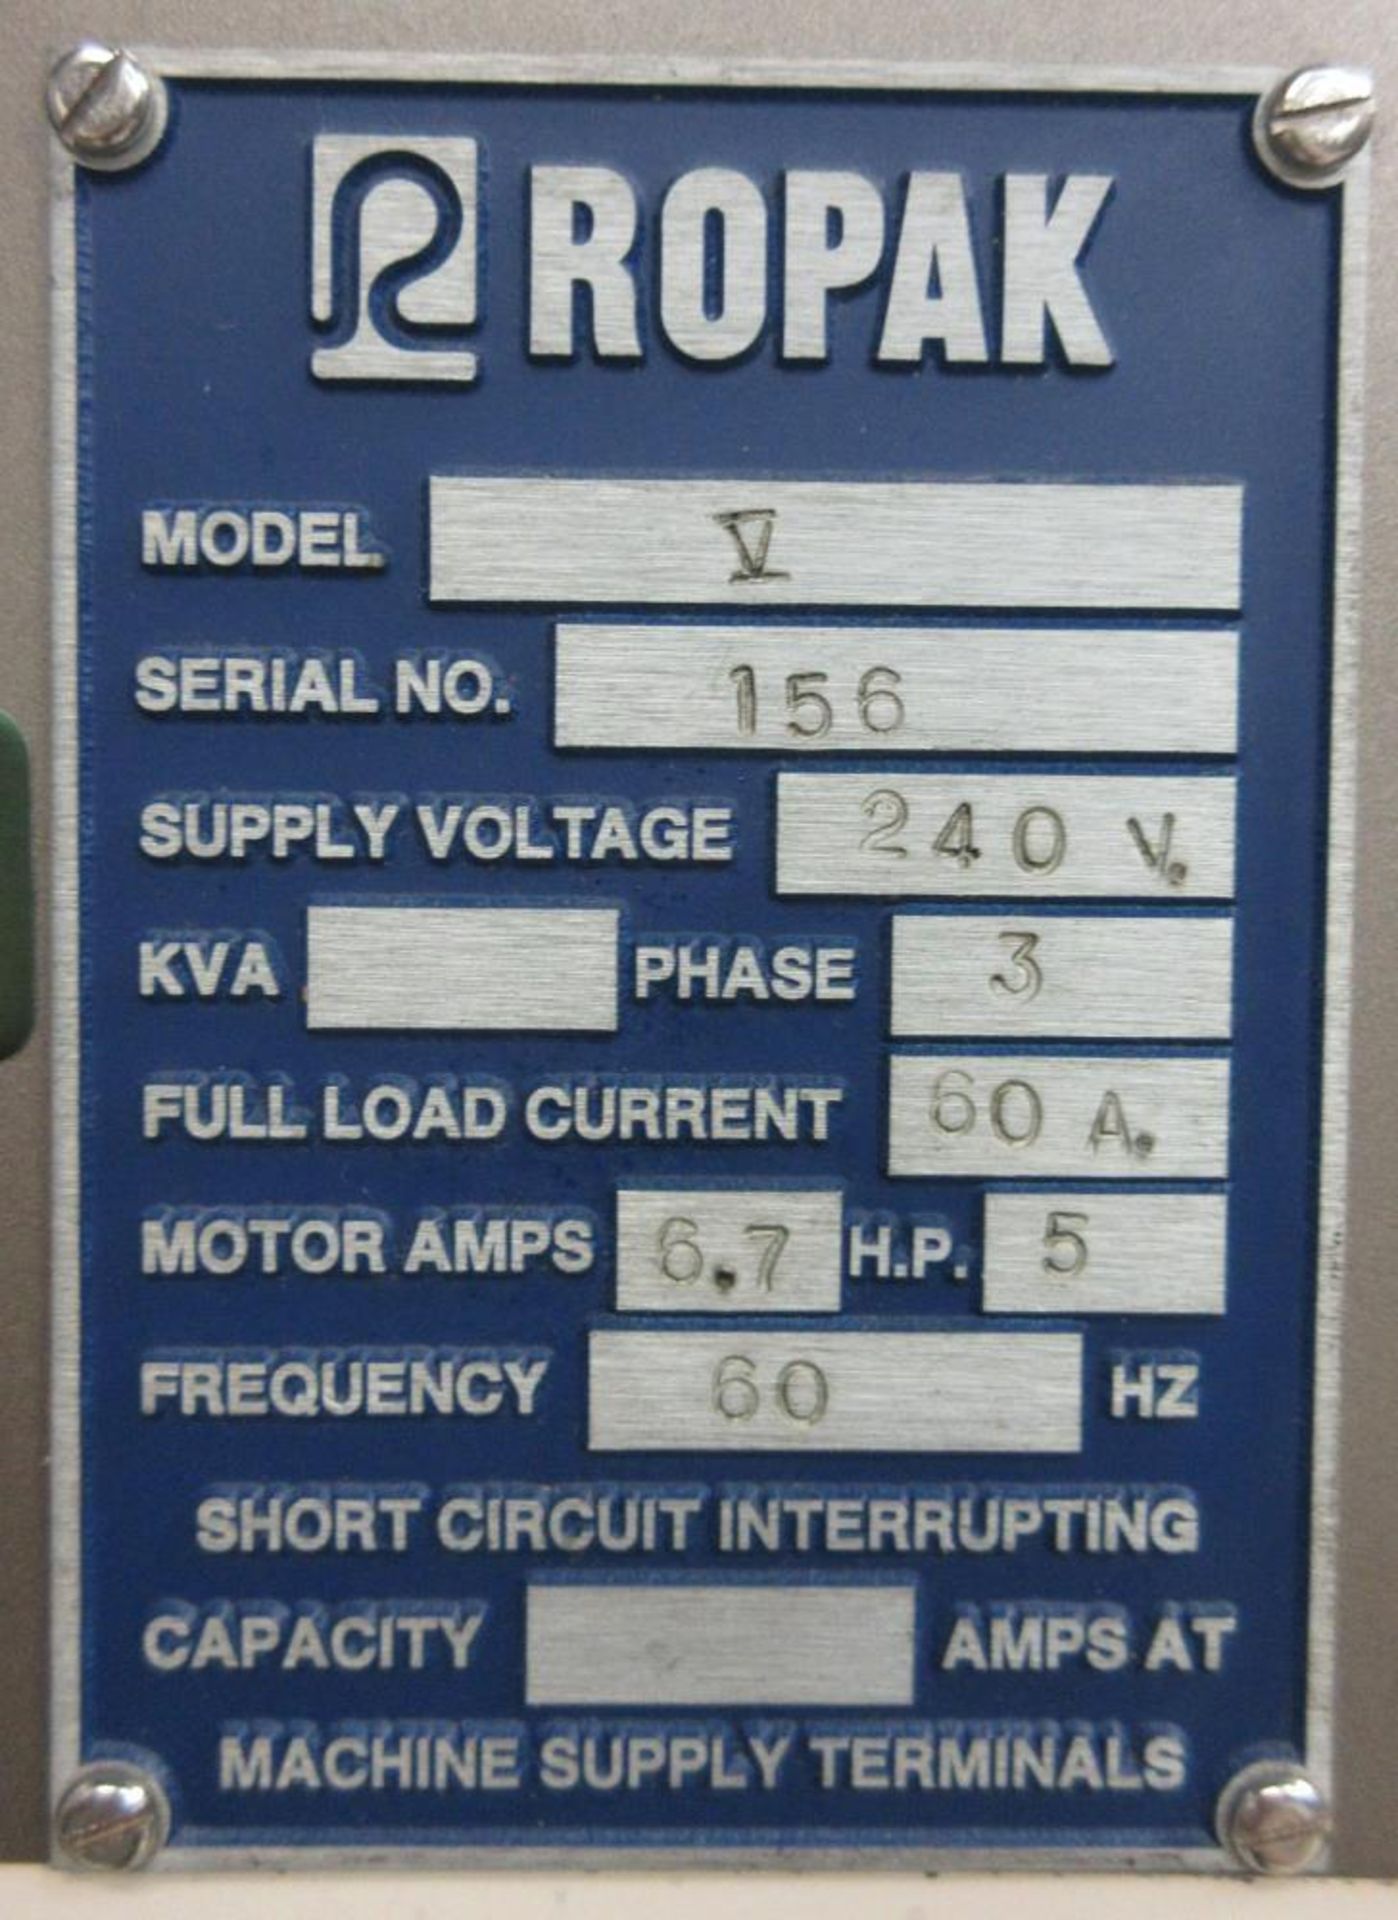 Ropak Model V High-Speed Rotary Pouch Machine with Volumetric Screw Product Feeder - Image 30 of 30